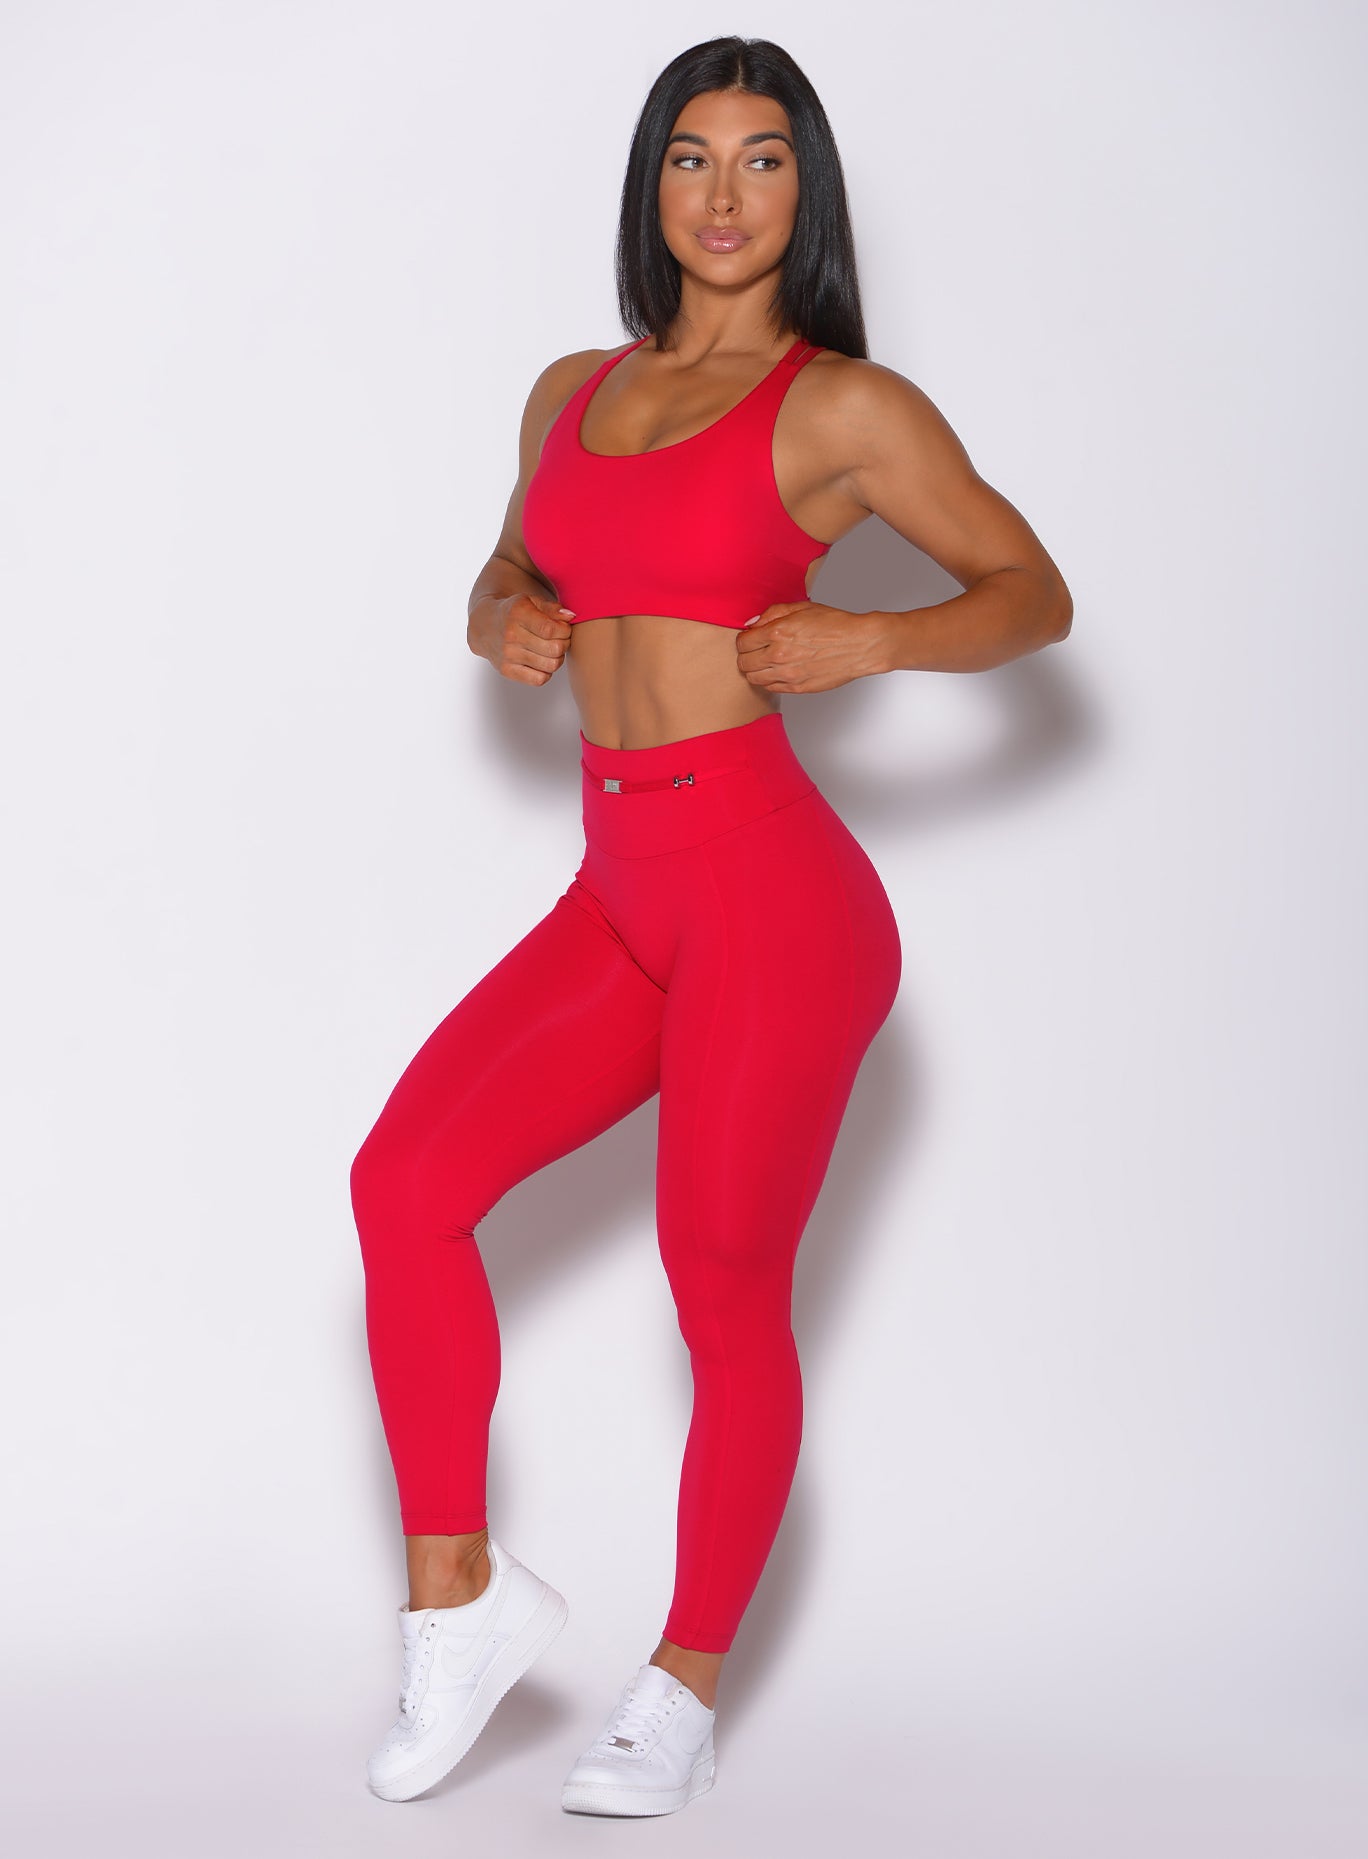 Left side profile view of a model angled left wearing our red barbell sports bra and a matching leggings